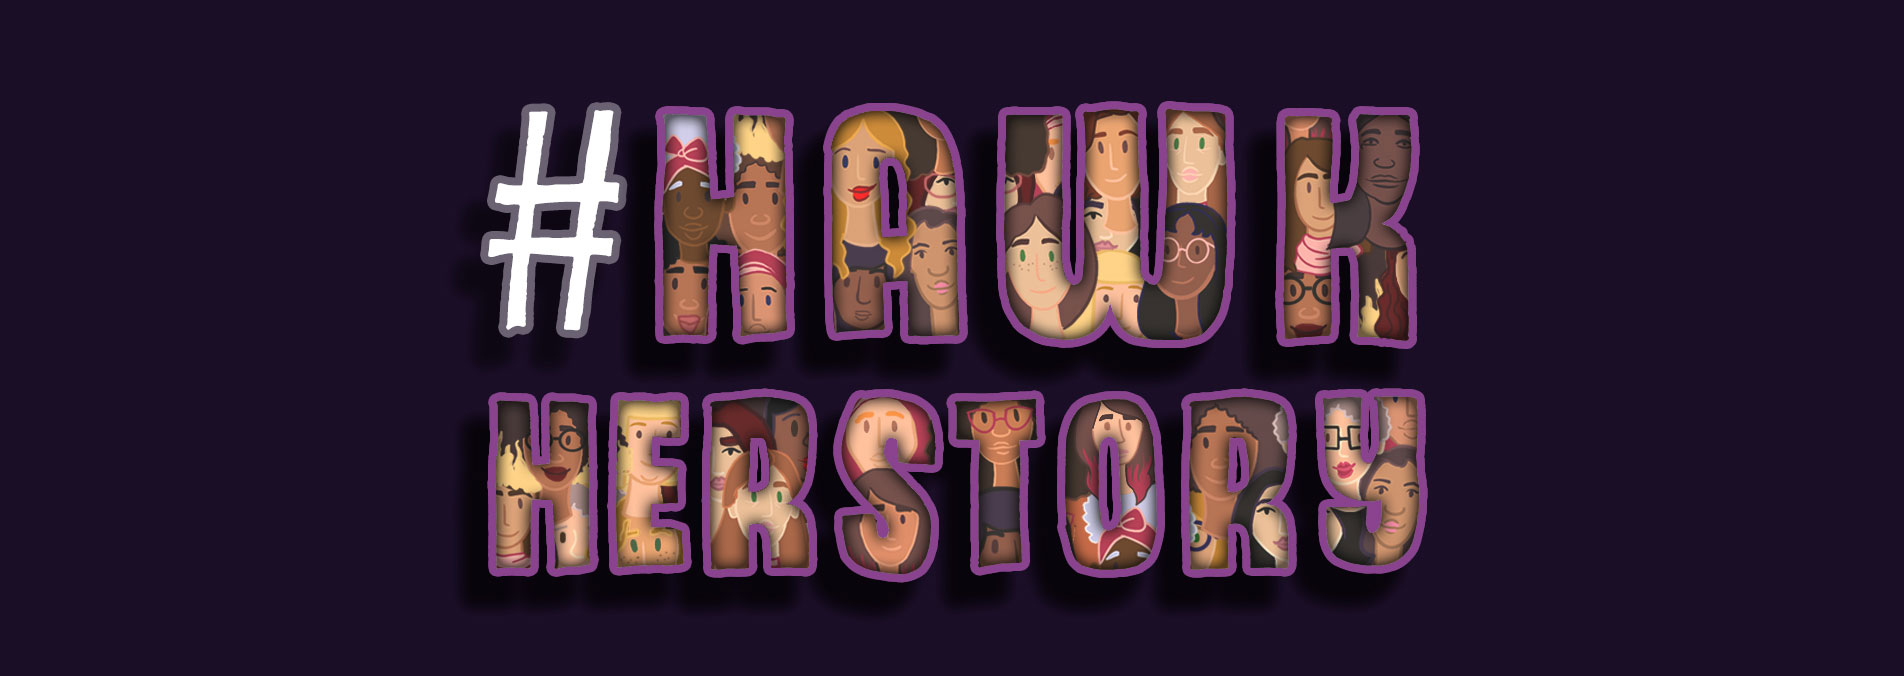 GRAPHIC: Image with the words "#HawkHerStory." The text is filled with different women. The background is all purple. Graphic created by The Signal Online Editor Alyssa Shotwell.